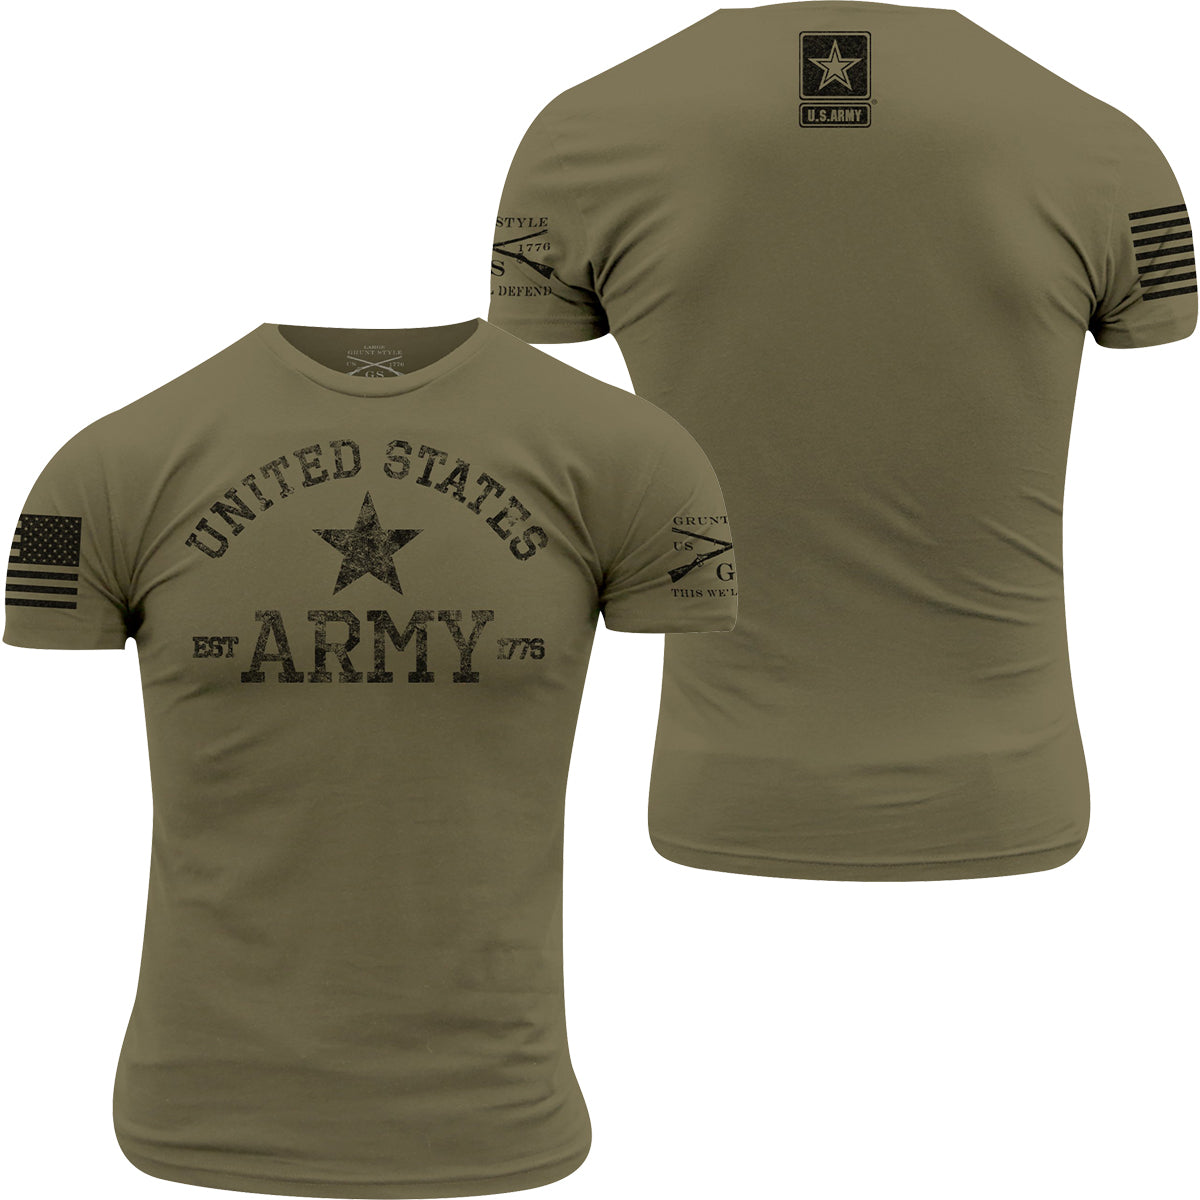 Grunt Style Army - Est. 1775 T-Shirt - Military Green Grunt Style